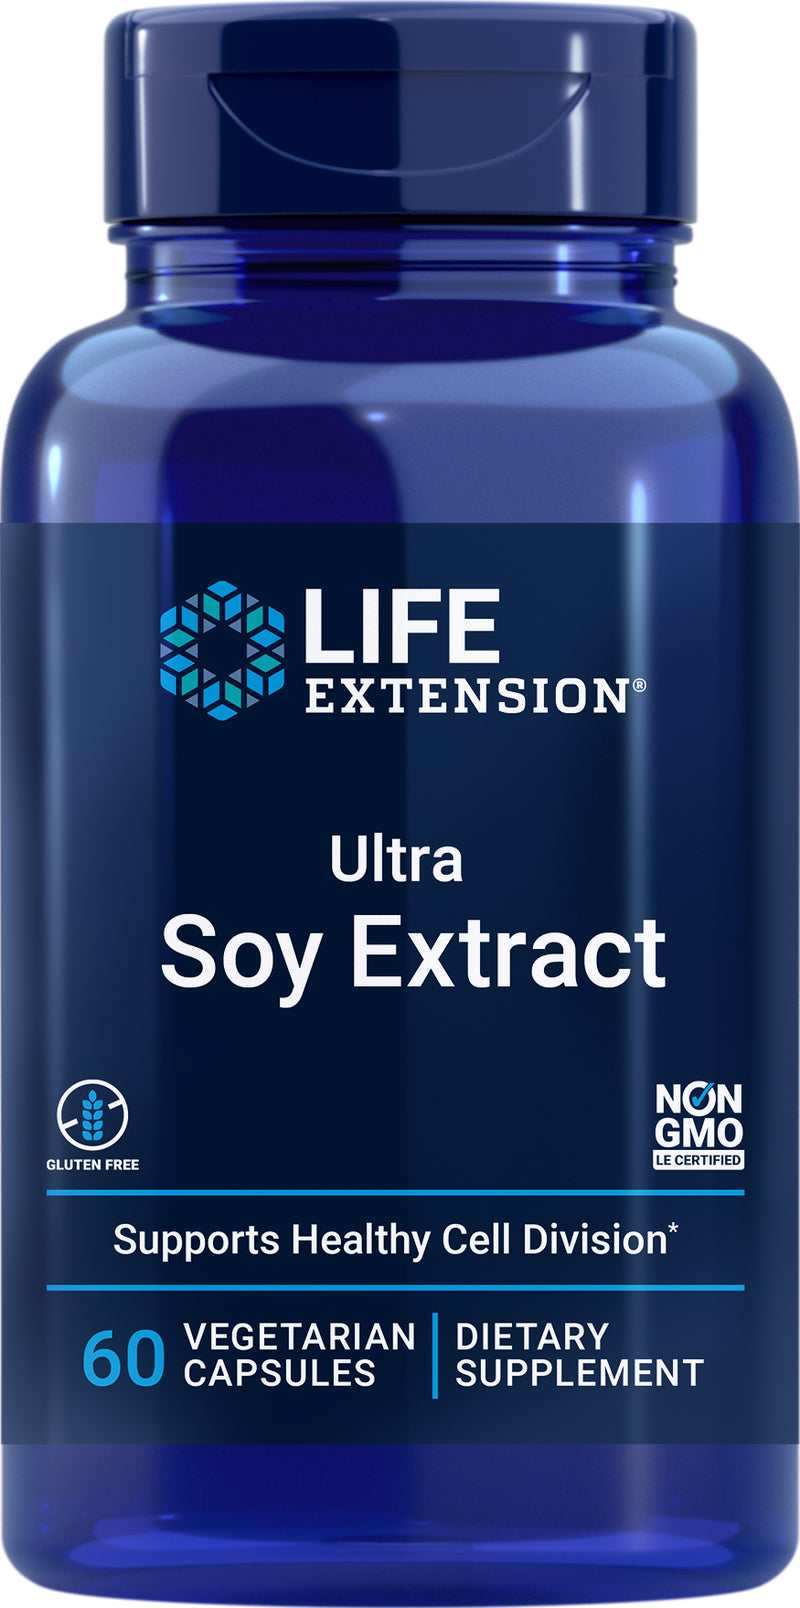 Ultra Soy Extract 150 veg caps by Life Extension